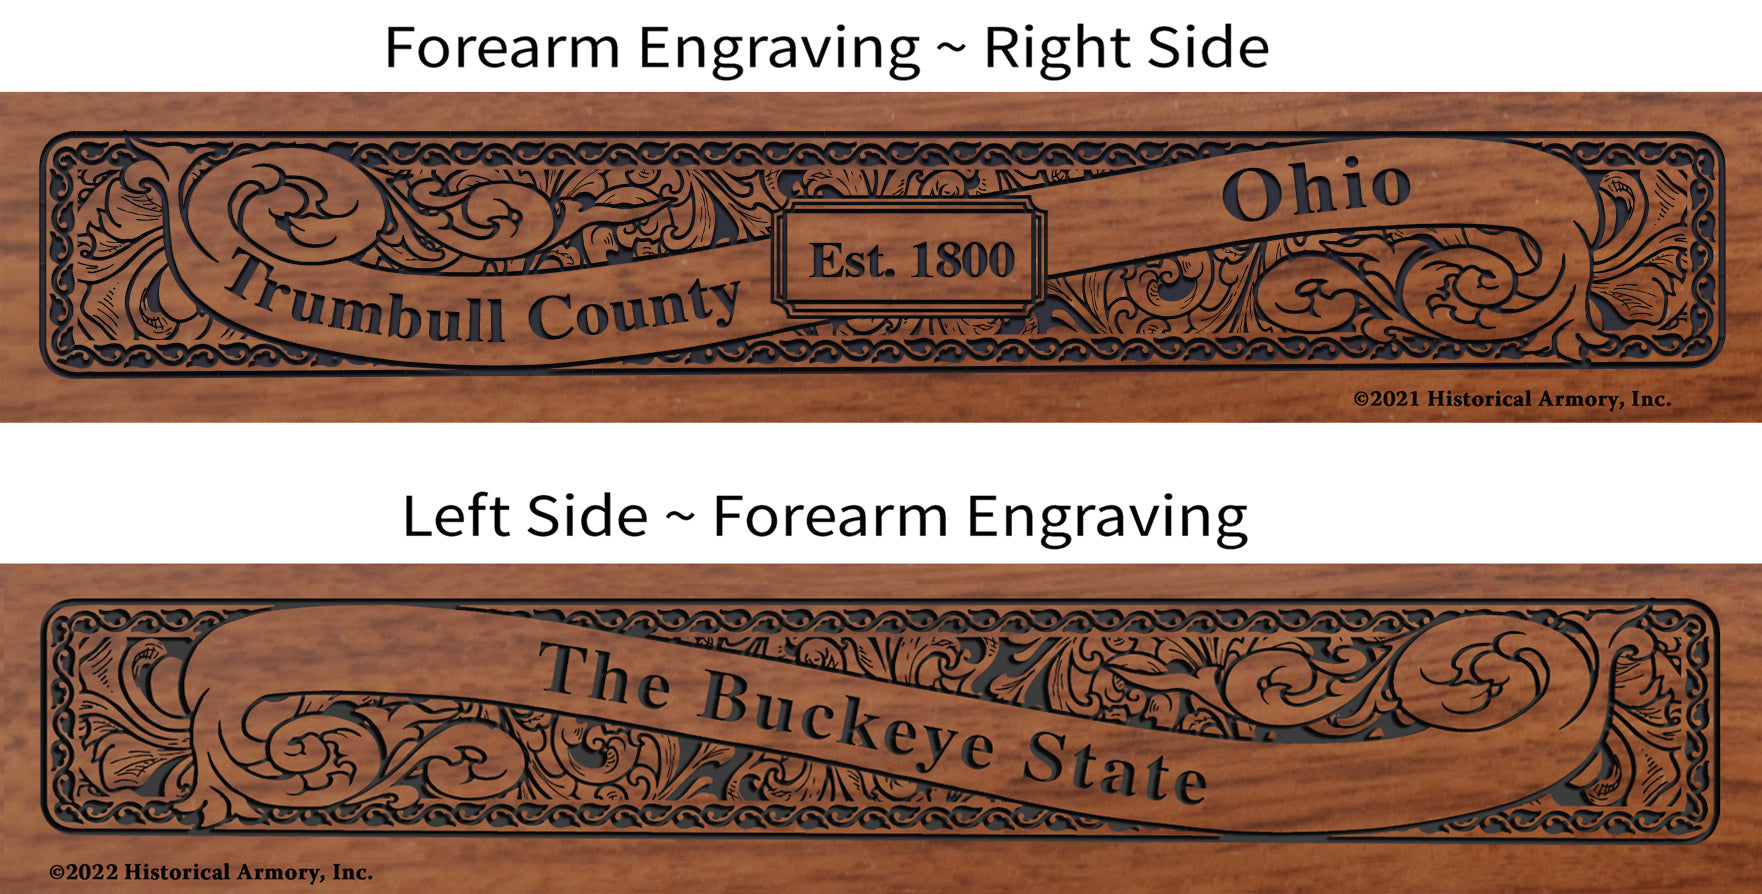 Trumbull County Ohio Engraved Rifle Forearm